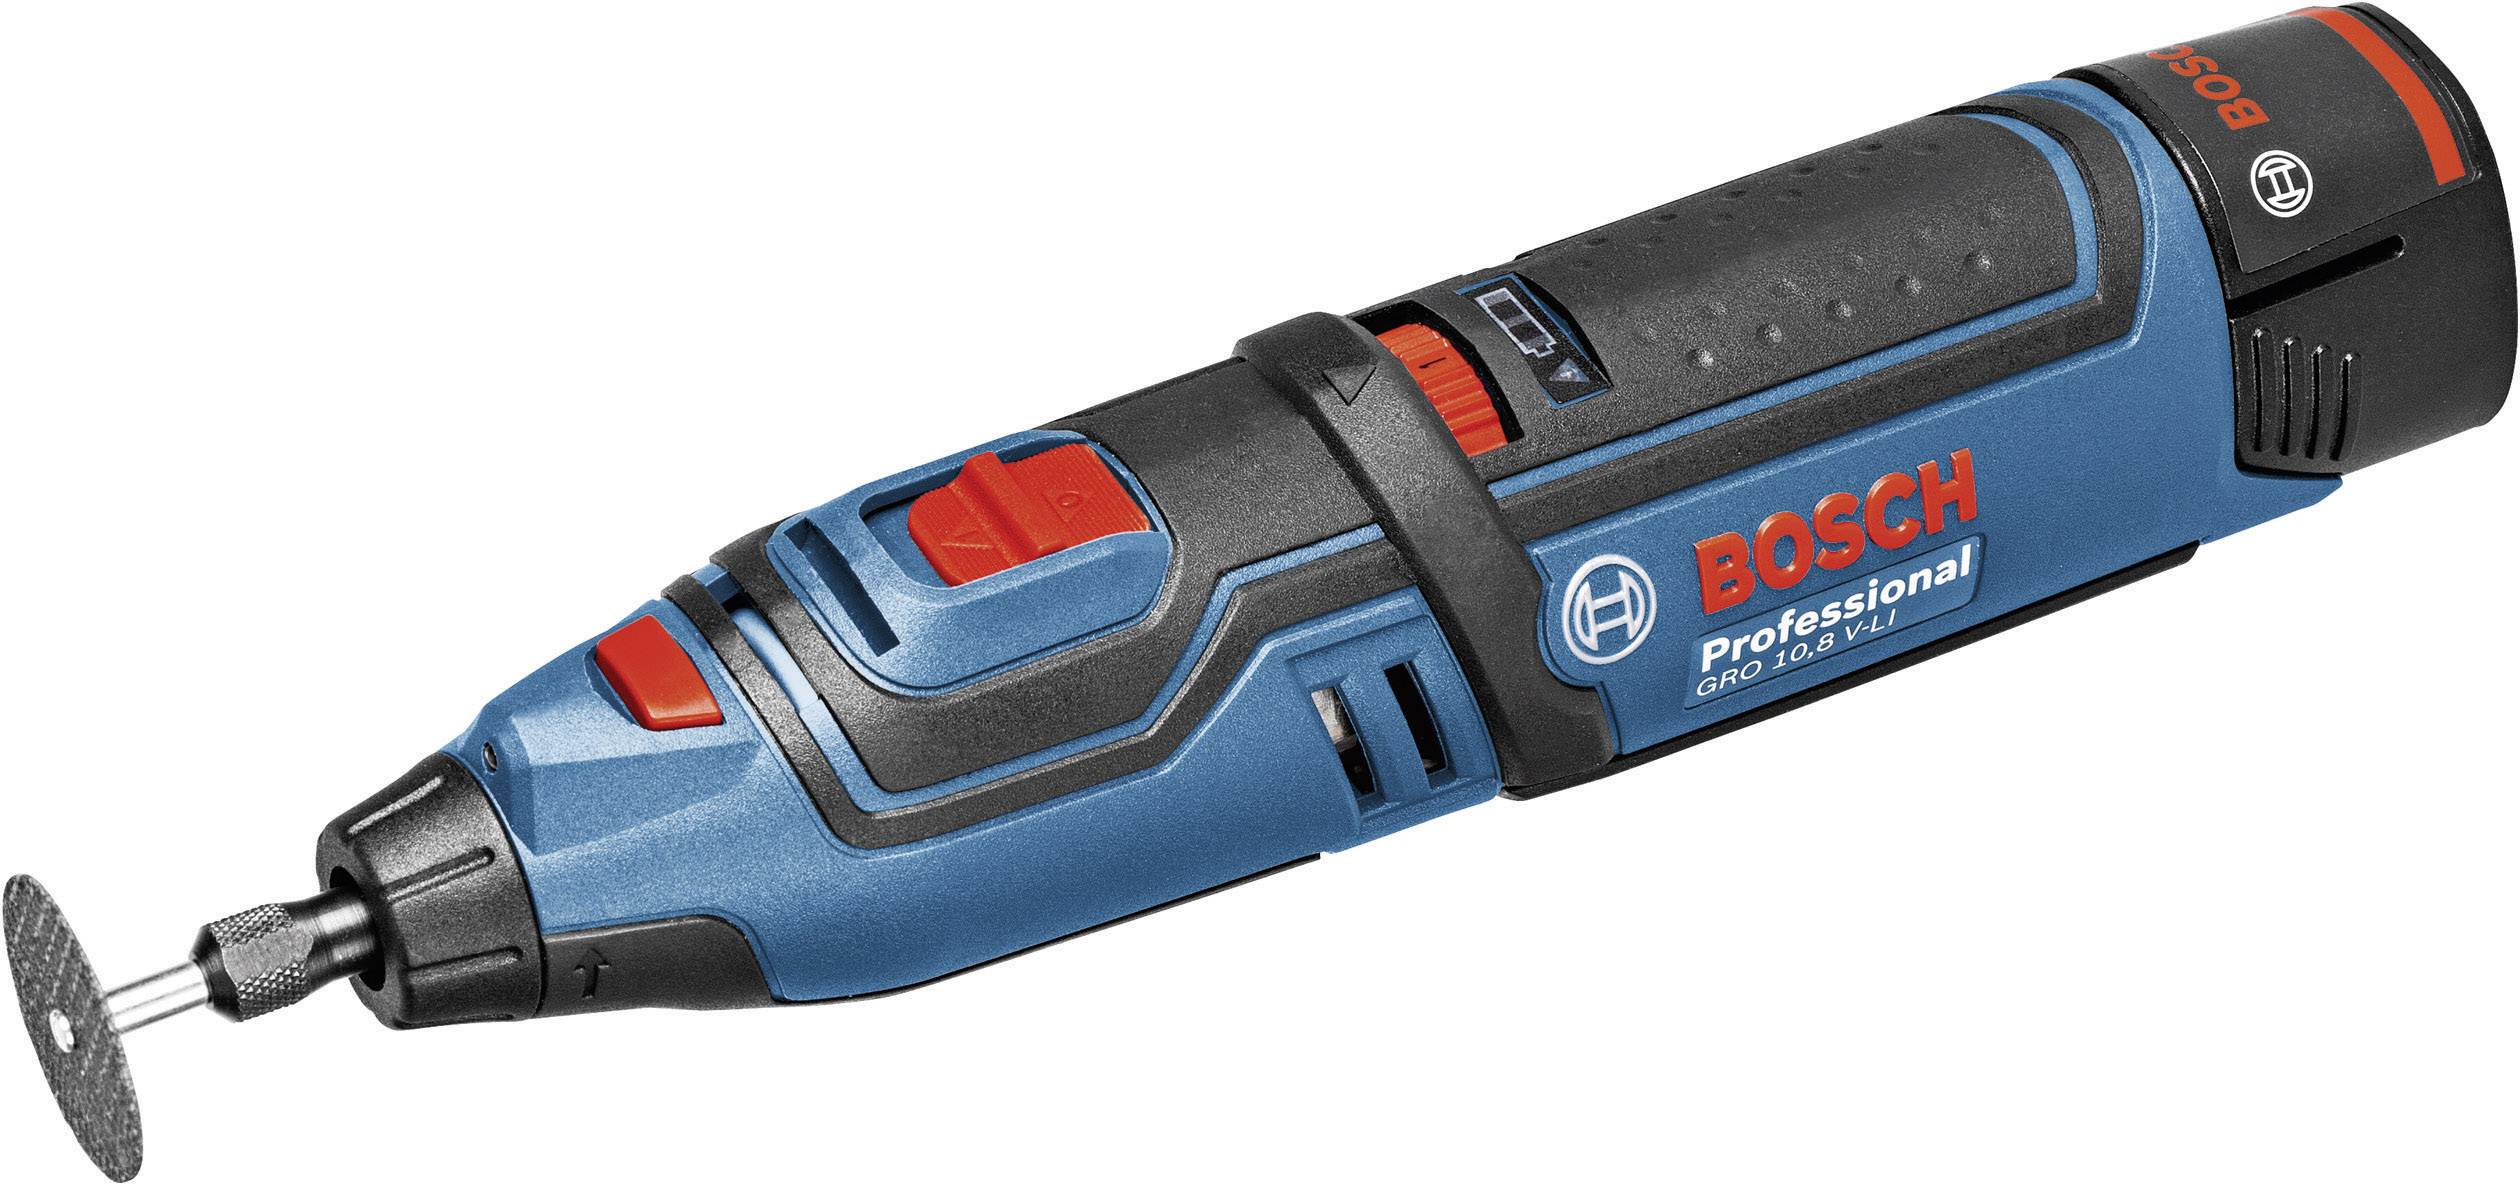 Siesta Bageri Ambient Bosch Professional GRO 12 V LI 06019C5001 Cordless multifunction tool incl.  spare battery, incl. accessories, incl. cas | Conrad.com